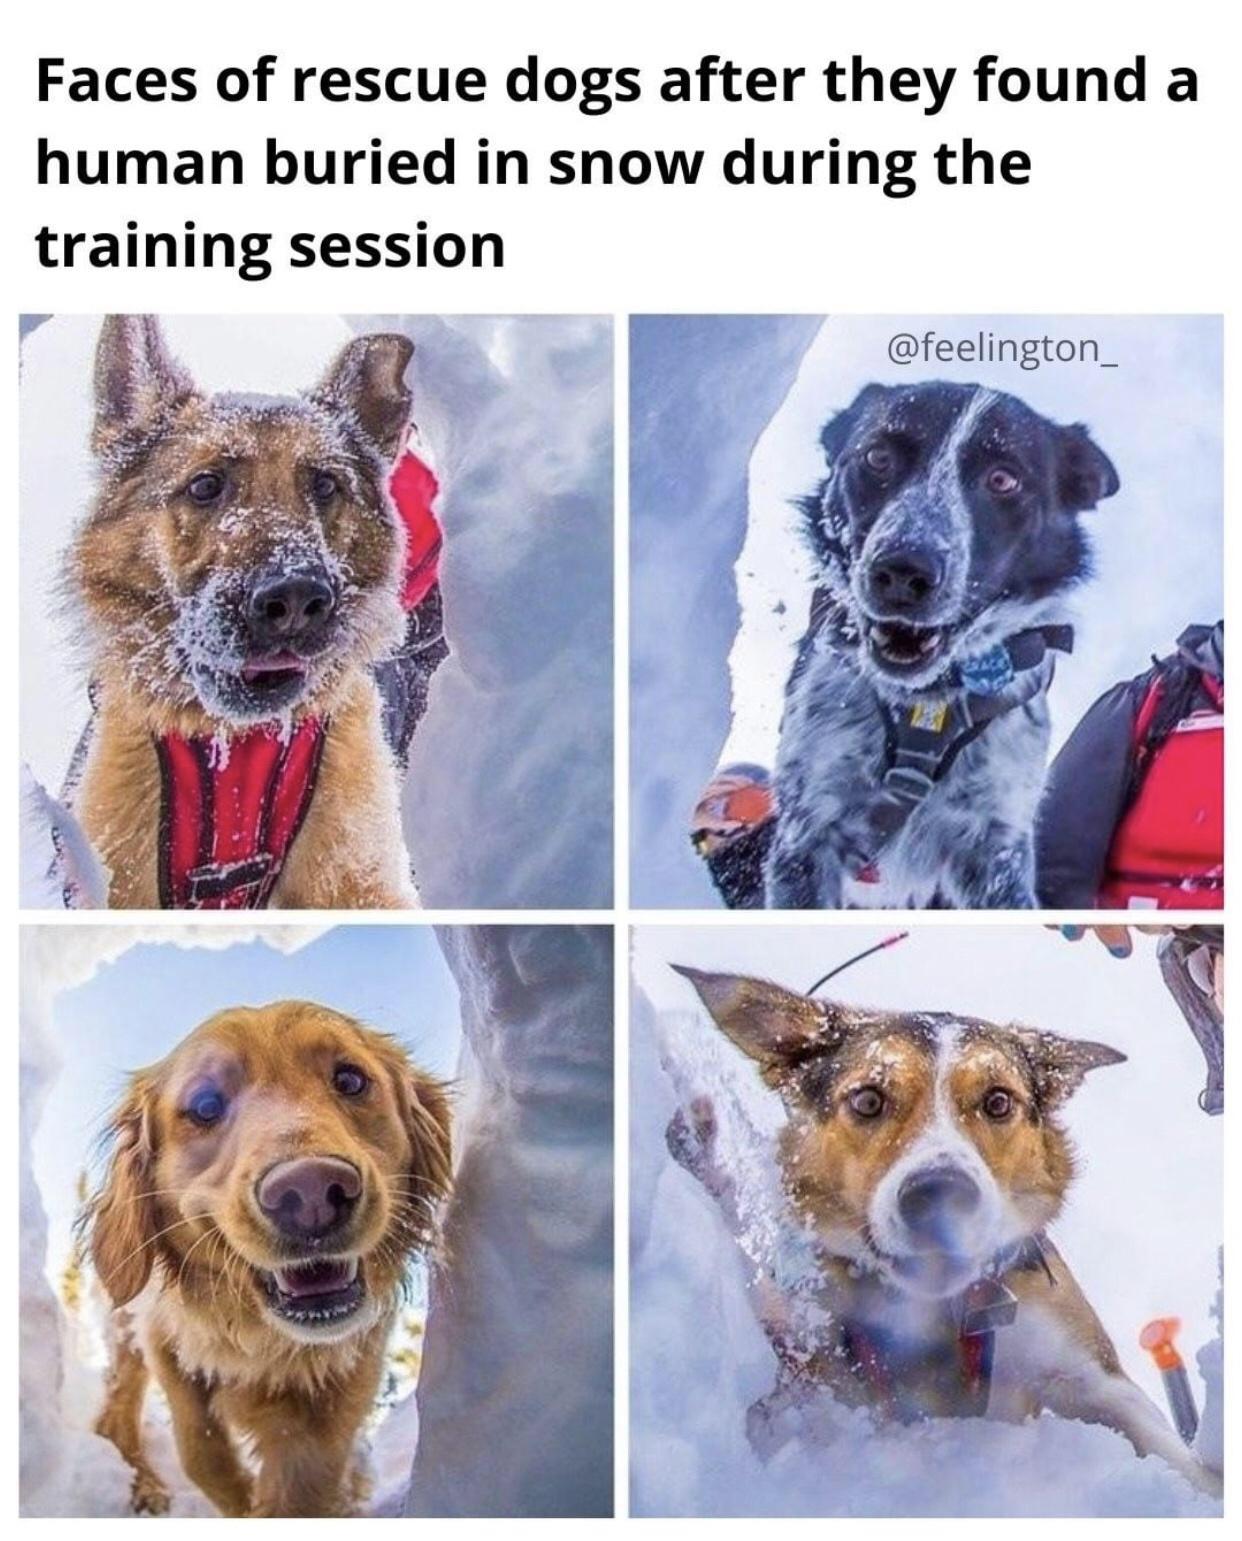 rescue dog faces - Faces of rescue dogs after they found a human buried in snow during the training session